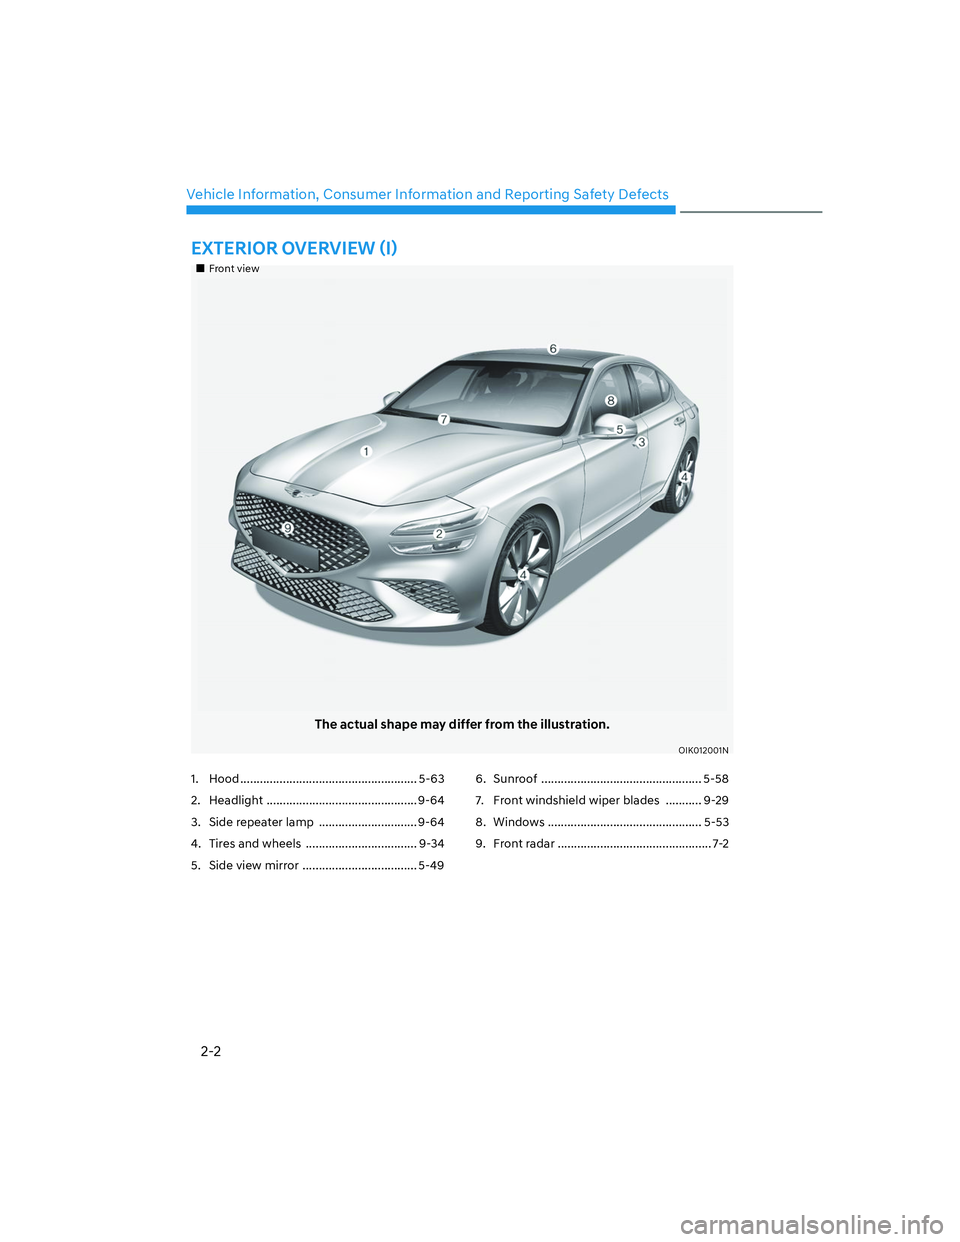 GENESIS G70 2023 User Guide 2-2
Vehicle Information, Consumer Information and Reporting Safety Defects
�(�;�7�(�5�,�2�5��2�9�(�5�9�,�(�:�